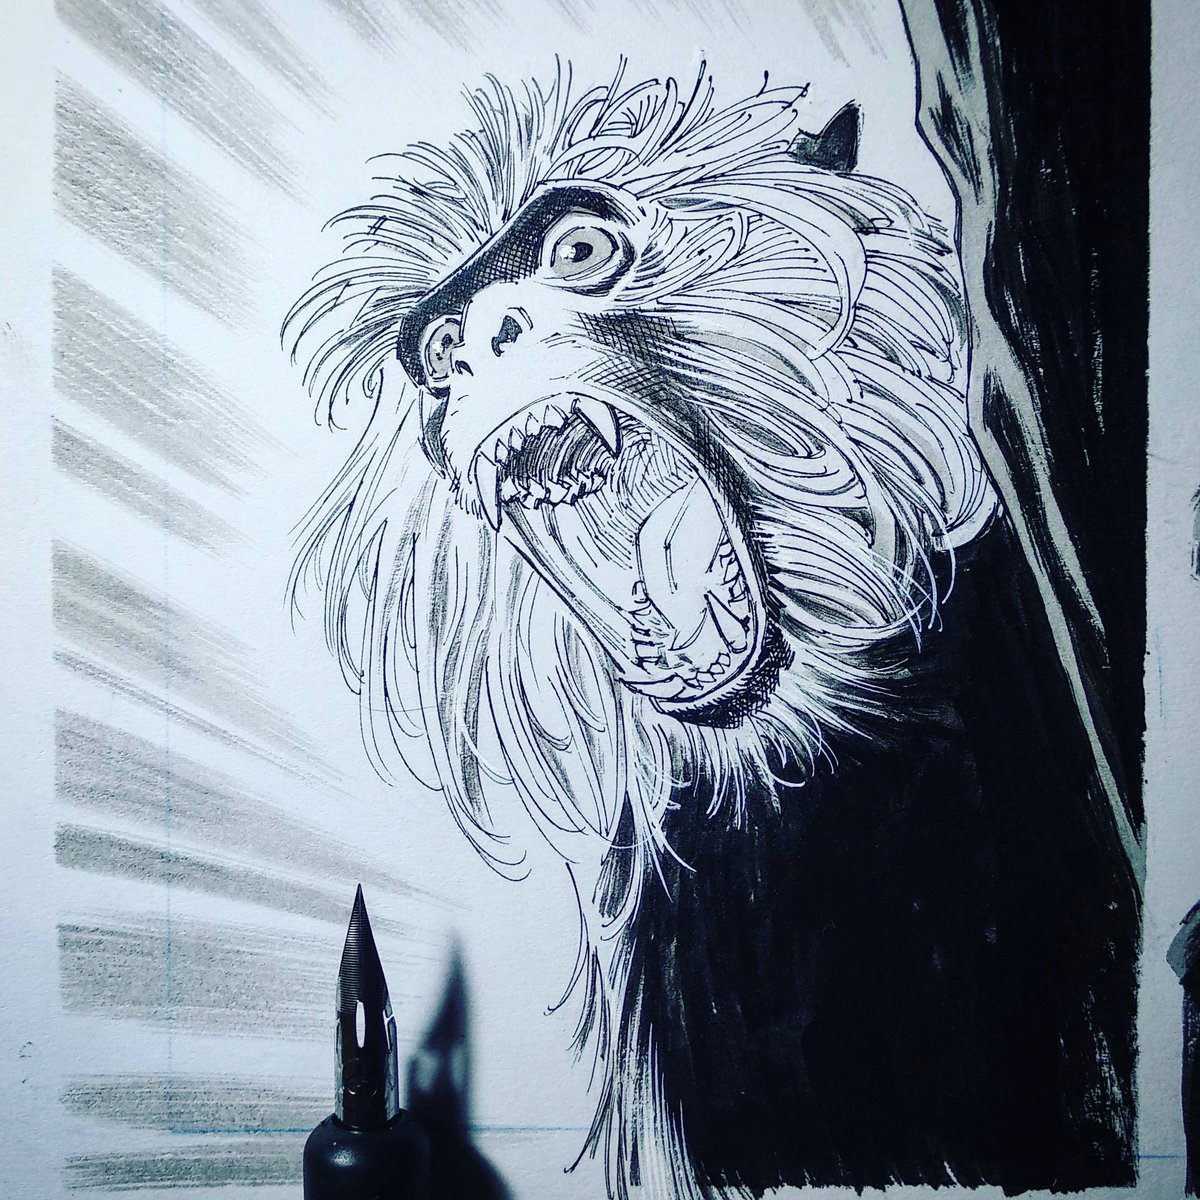 #Inktober day 8!

Monkeys, snakes, elephants, leopards, #thesesavageshores has got it all! It helps that I love drawing animals though.

Any guesses which species this guy here belongs to?

#inktober2018 #makingcomics #inking